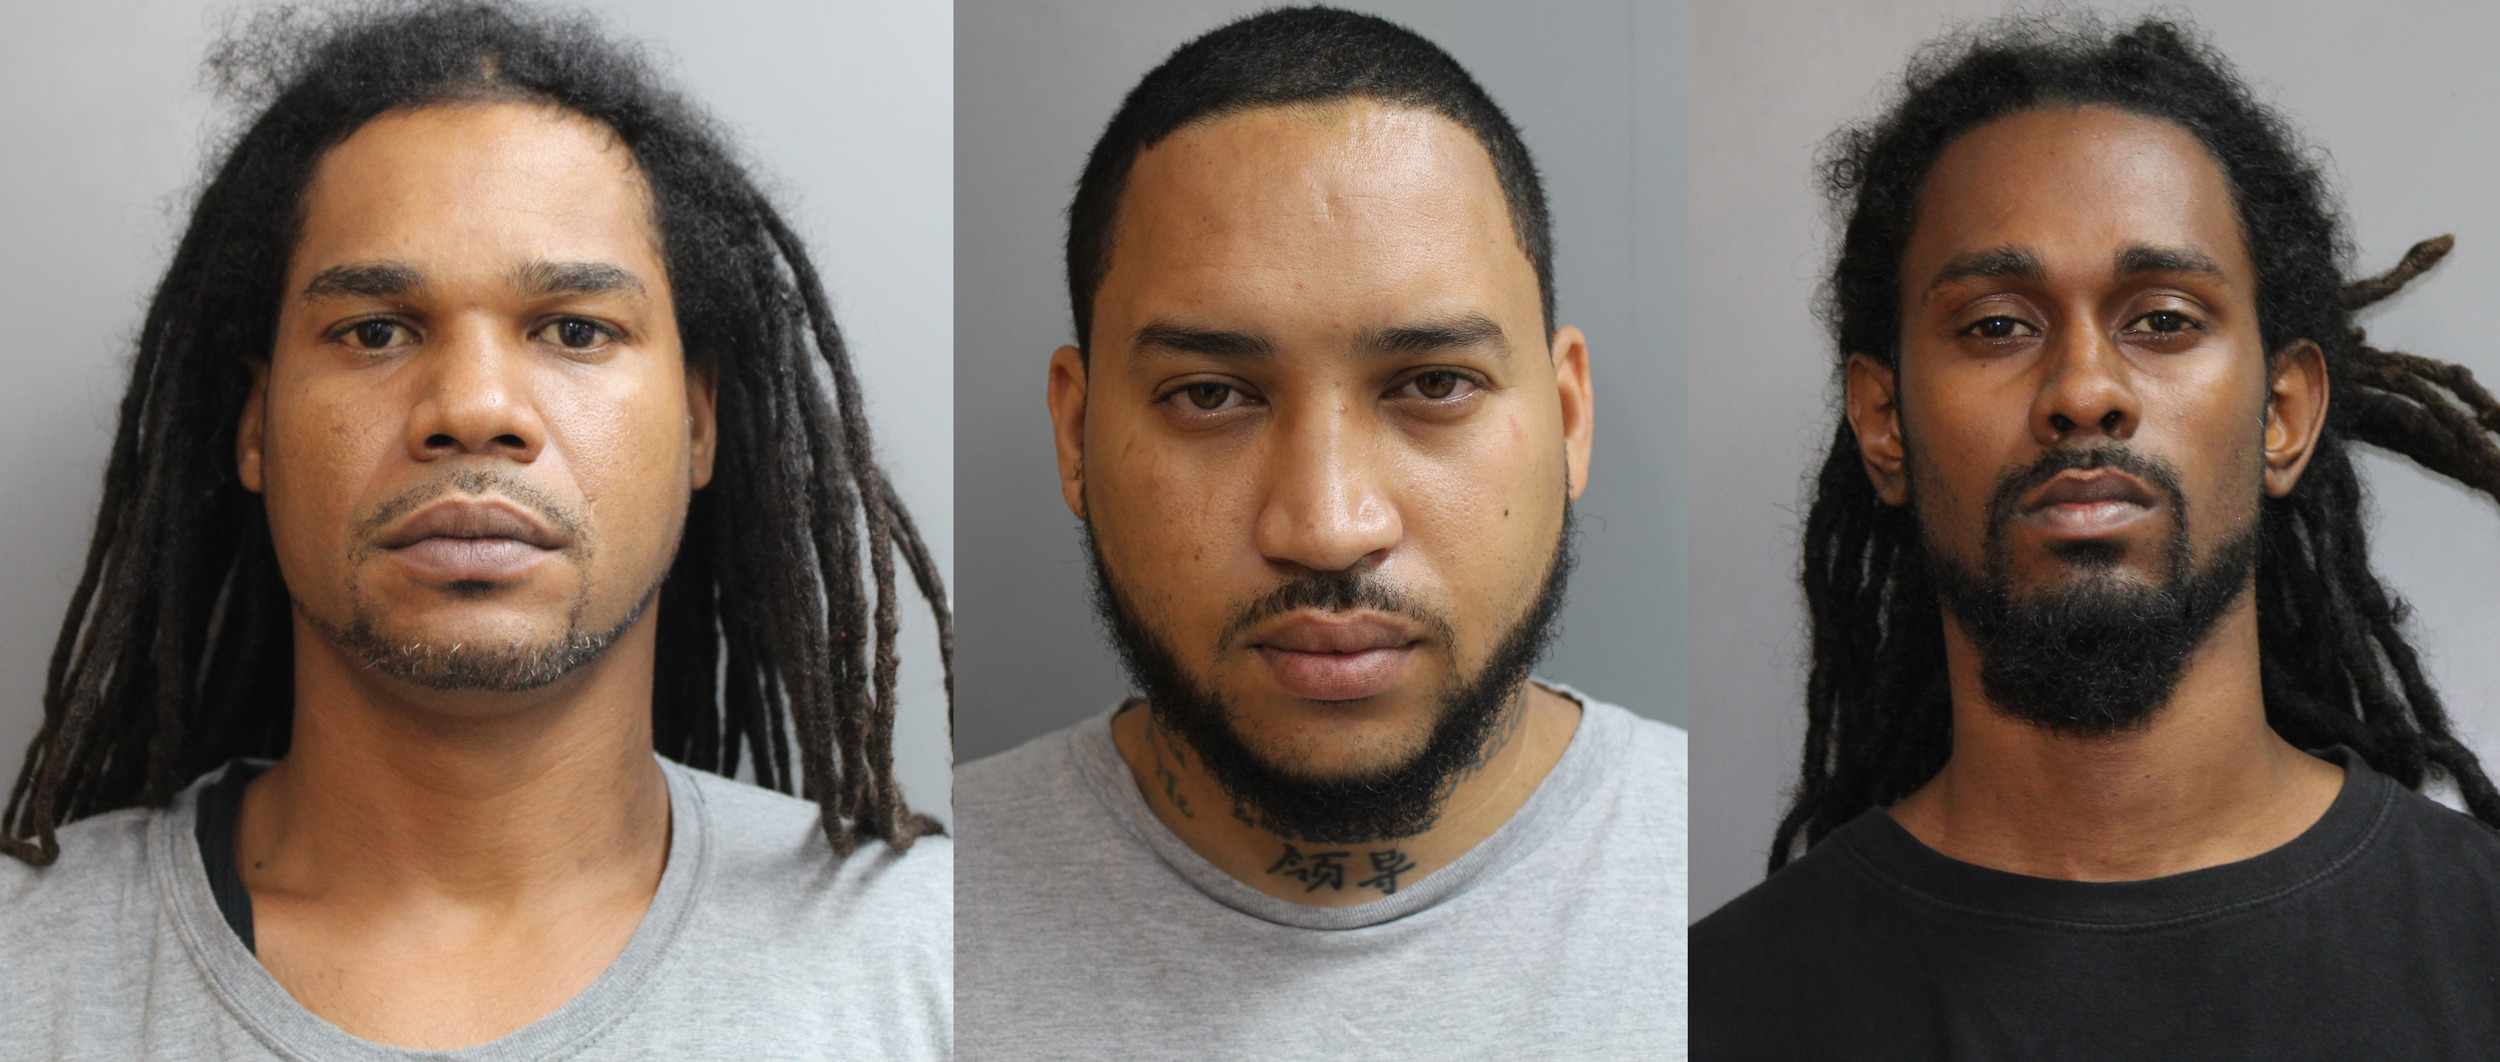 3 Men Arrested For Aureo Diaz Heights Double Murder In Early Morning Raid